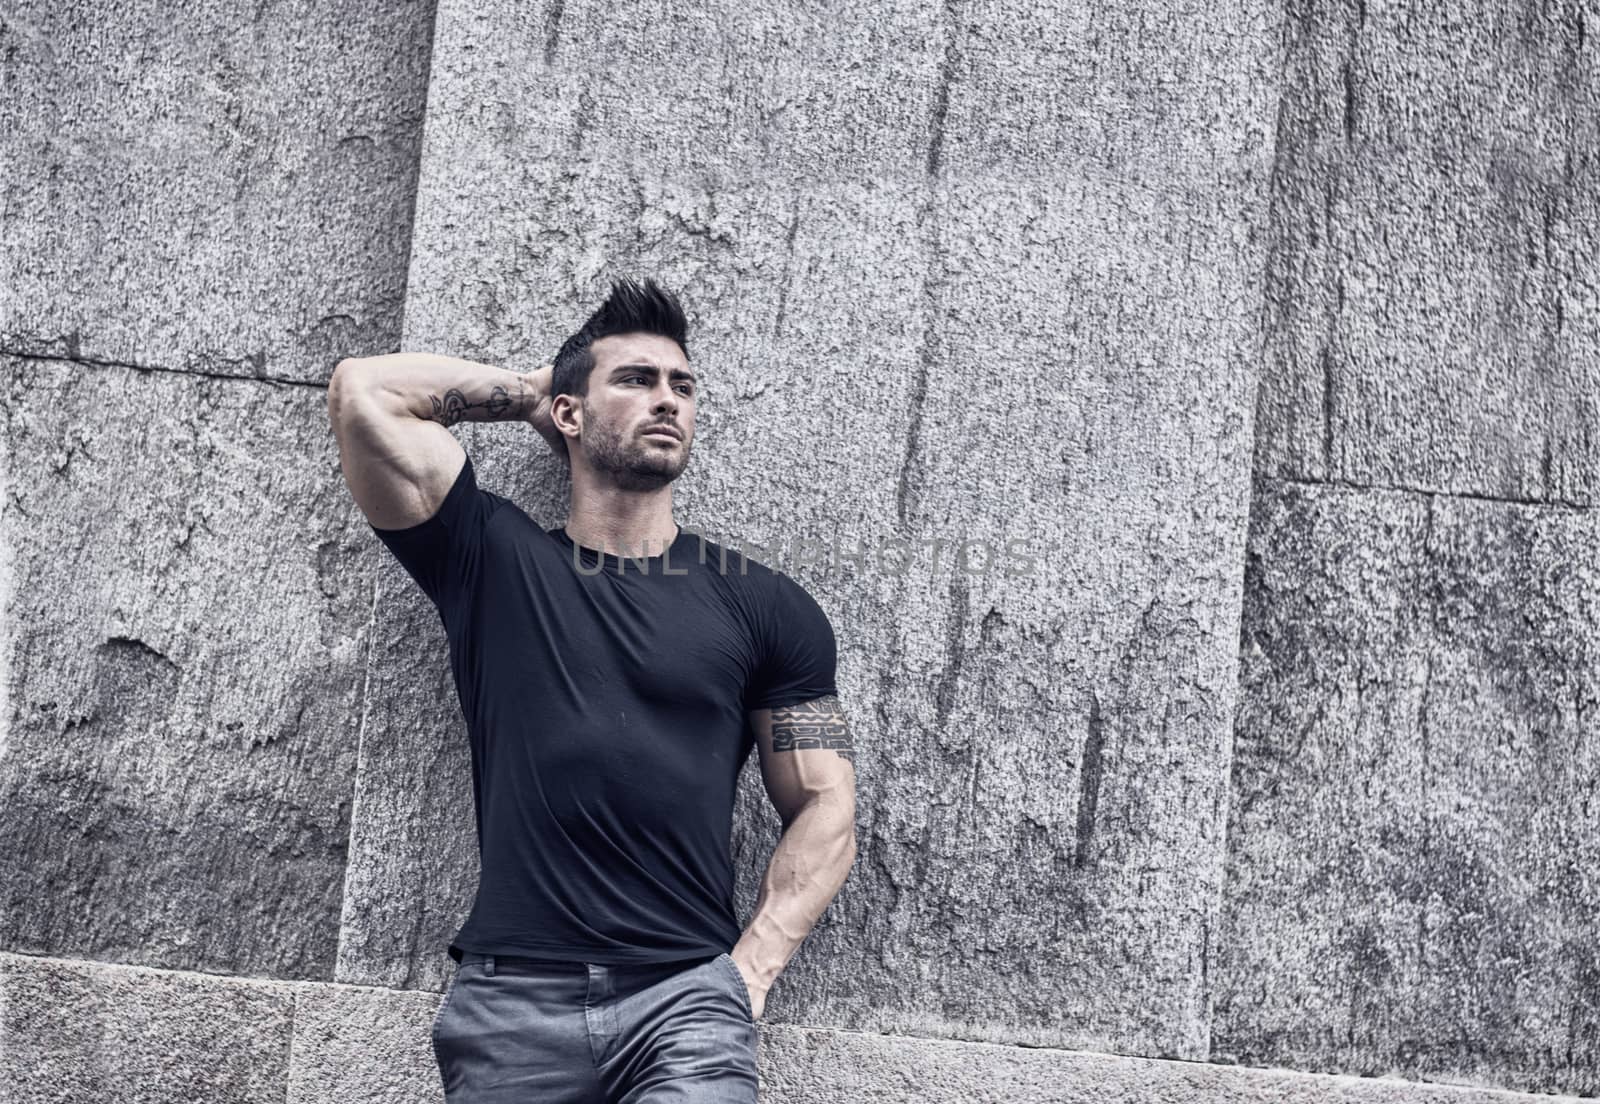 Attractive man outdoor. Athletic build, with tight t-shirt, leaning against stone wall